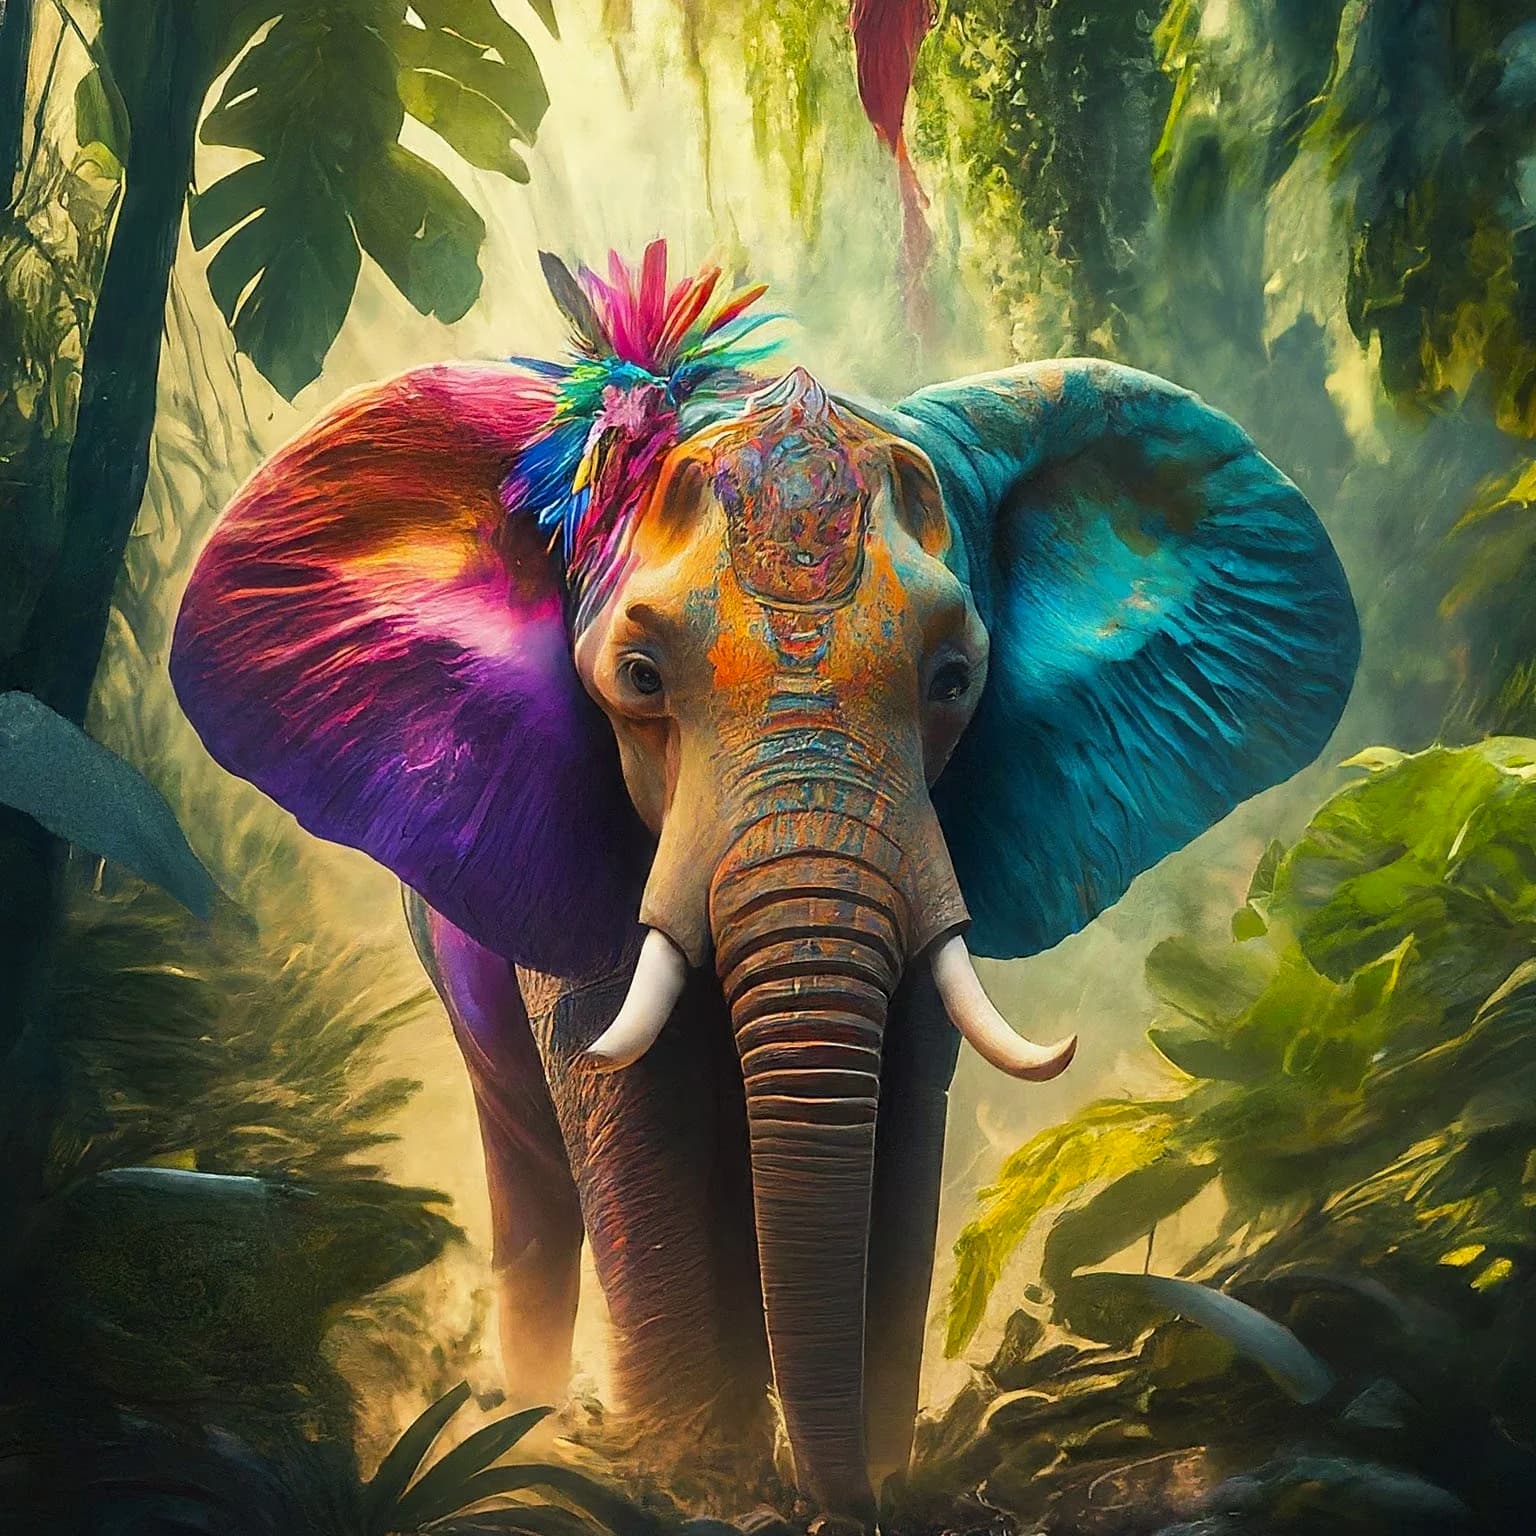 Prompt: “Generate a vibrant and lively image depicting an elephant partying in the heart of a lush, vibrant jungle. The elephant should be in various colors and be adorned with fun accessories.”